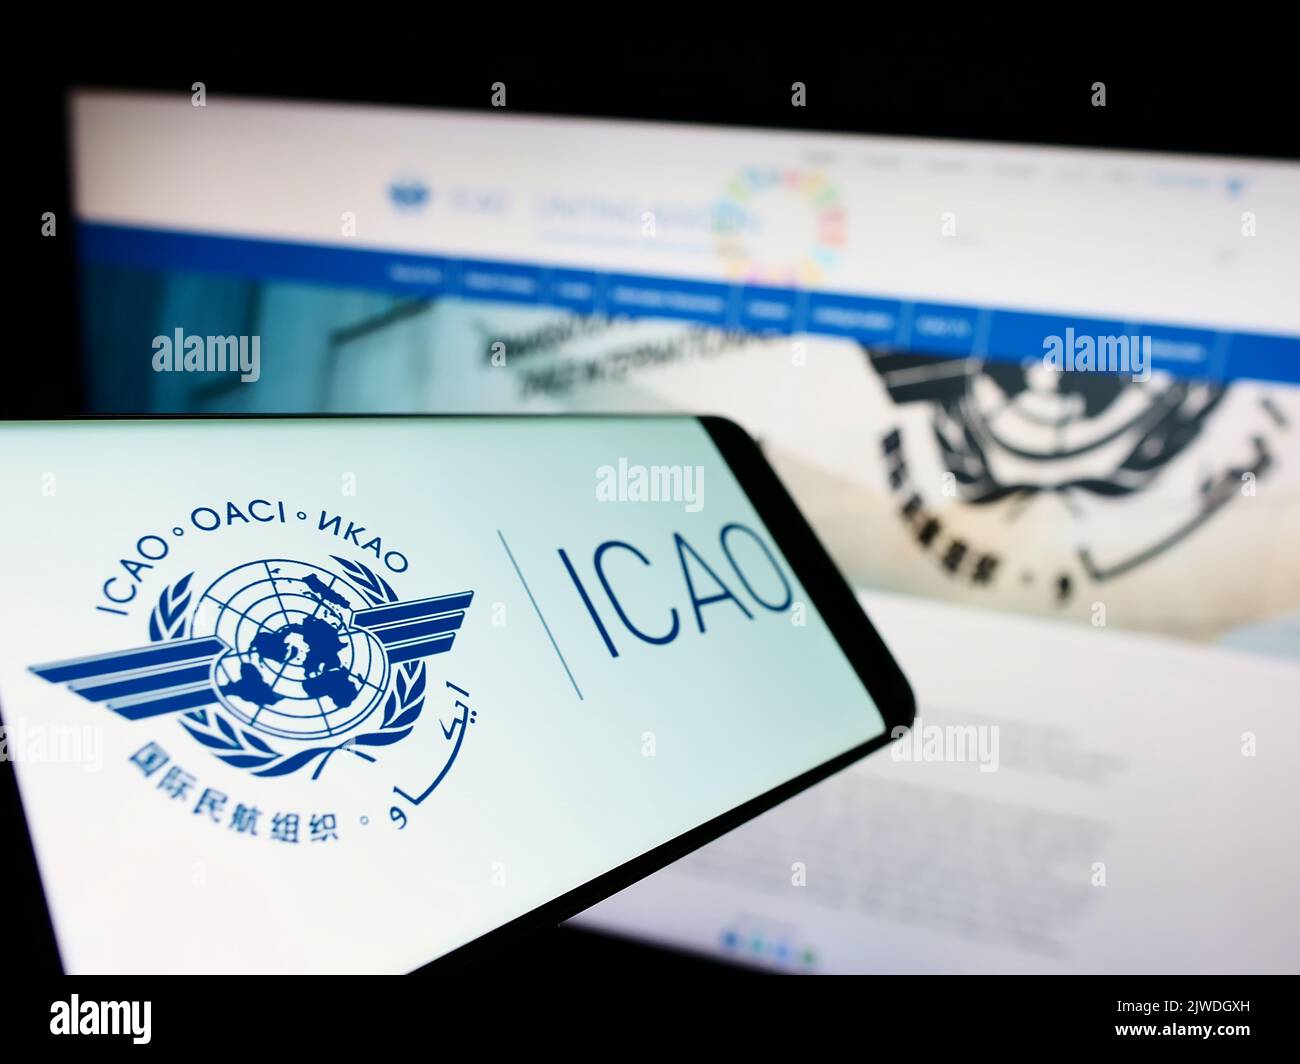 Mobile phone with logo of International Civil Aviation Organization (ICAO) on screen in front of website. Focus on center-left of phone display. Stock Photo